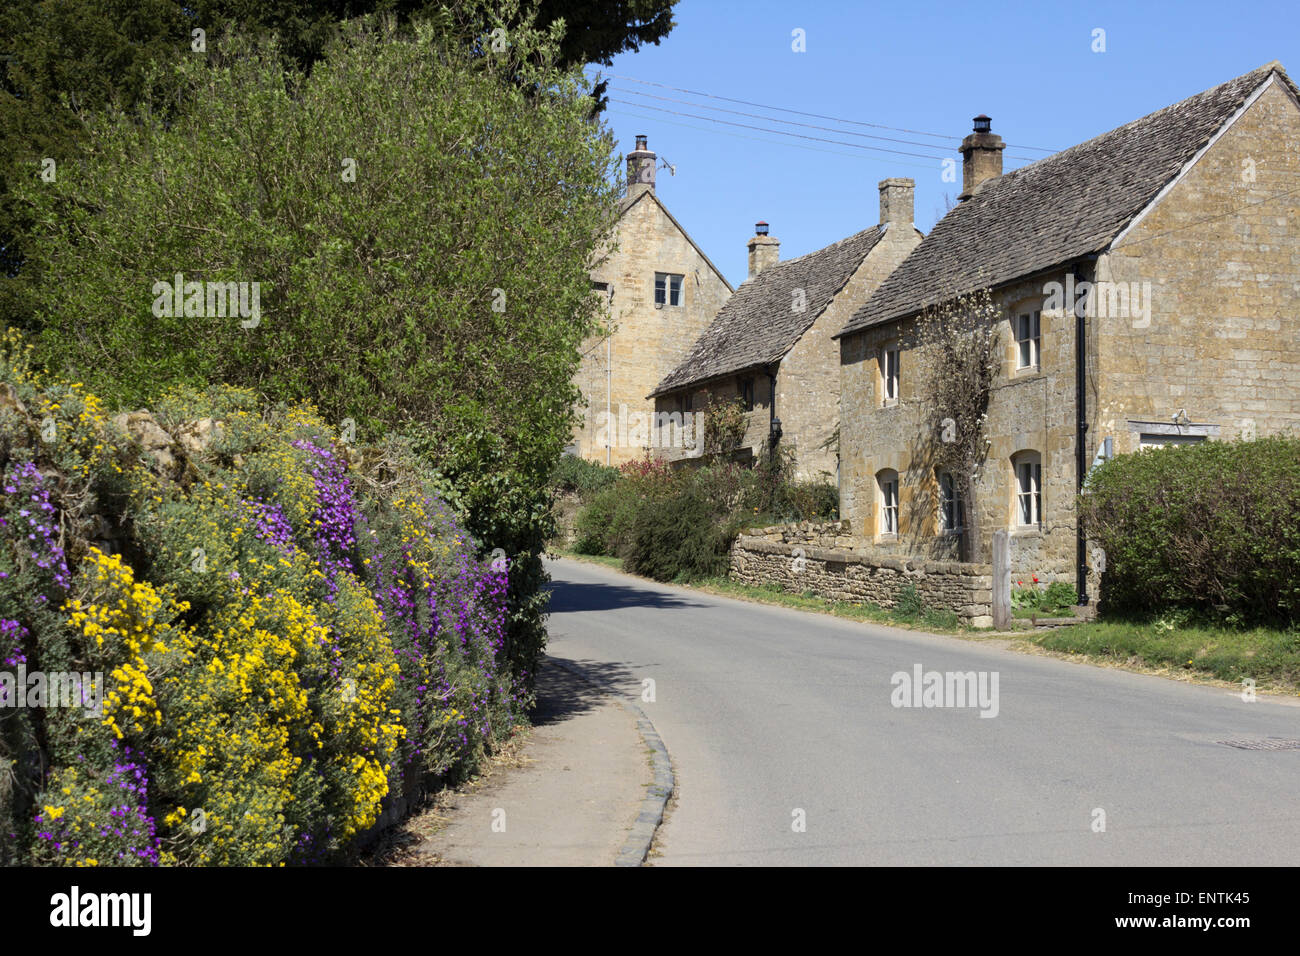 Cotswold cottages, Guiting Power, Cotswolds, Gloucestershire, Angleterre, Royaume-Uni, Europe Banque D'Images